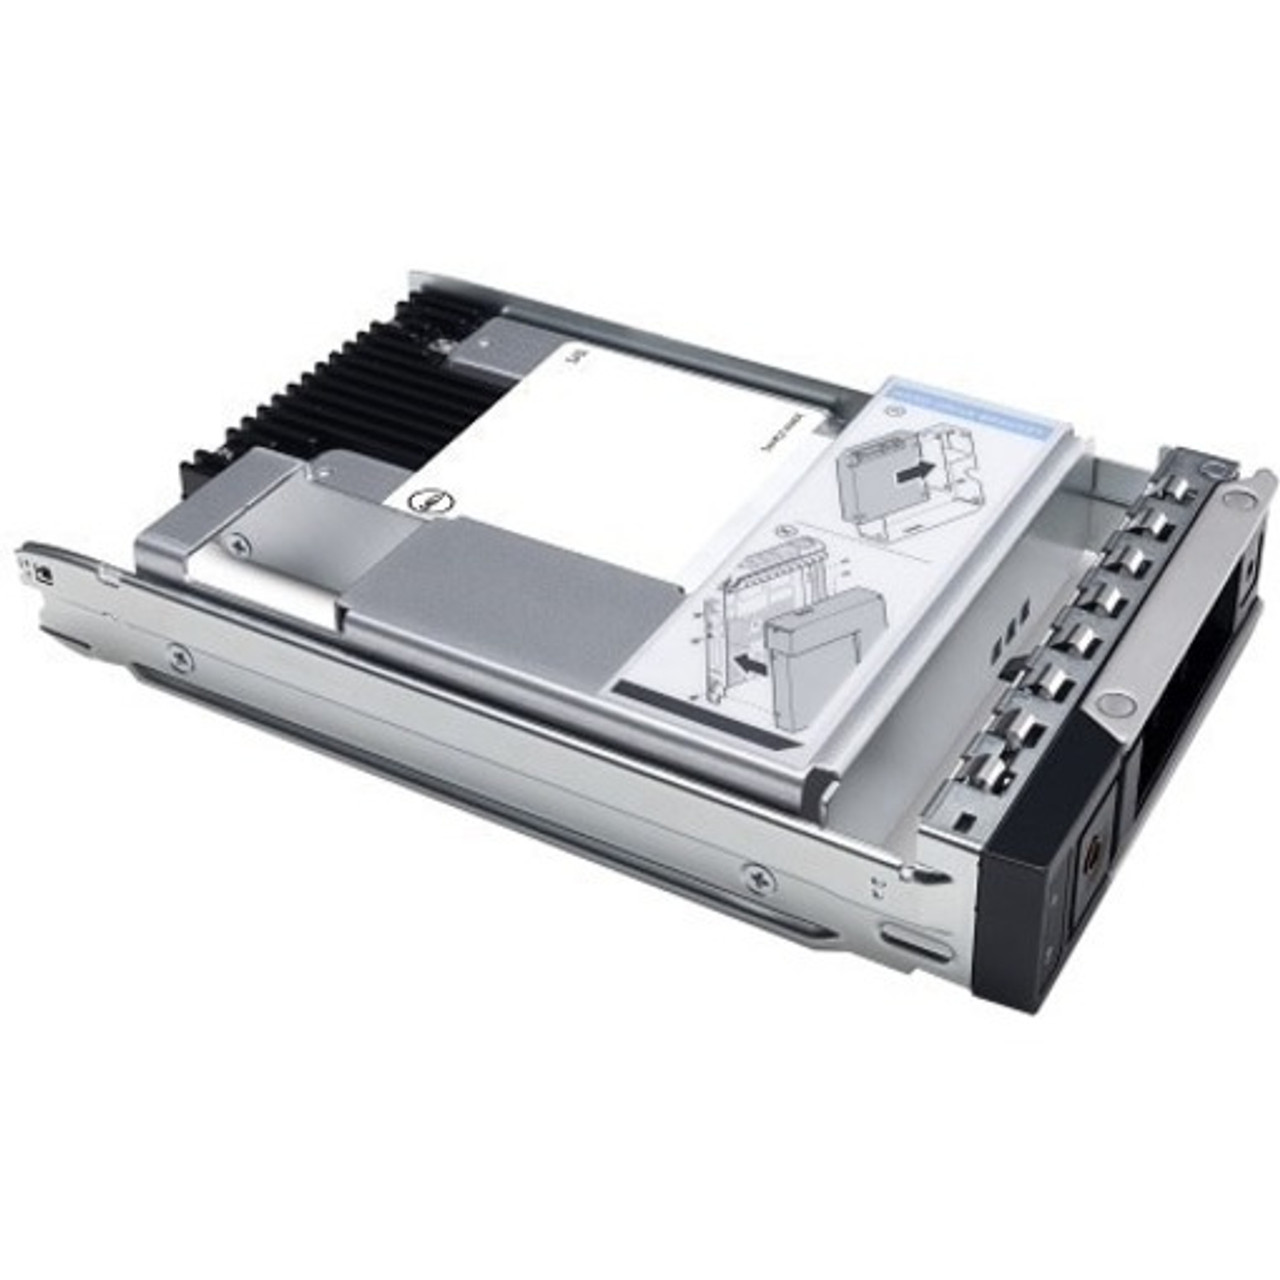 Dell 960 GB Solid State Drive - 2.5" Internal - SAS (12Gb/s SAS) - 3.5" Carrier - Mixed Use - 345-BDBE